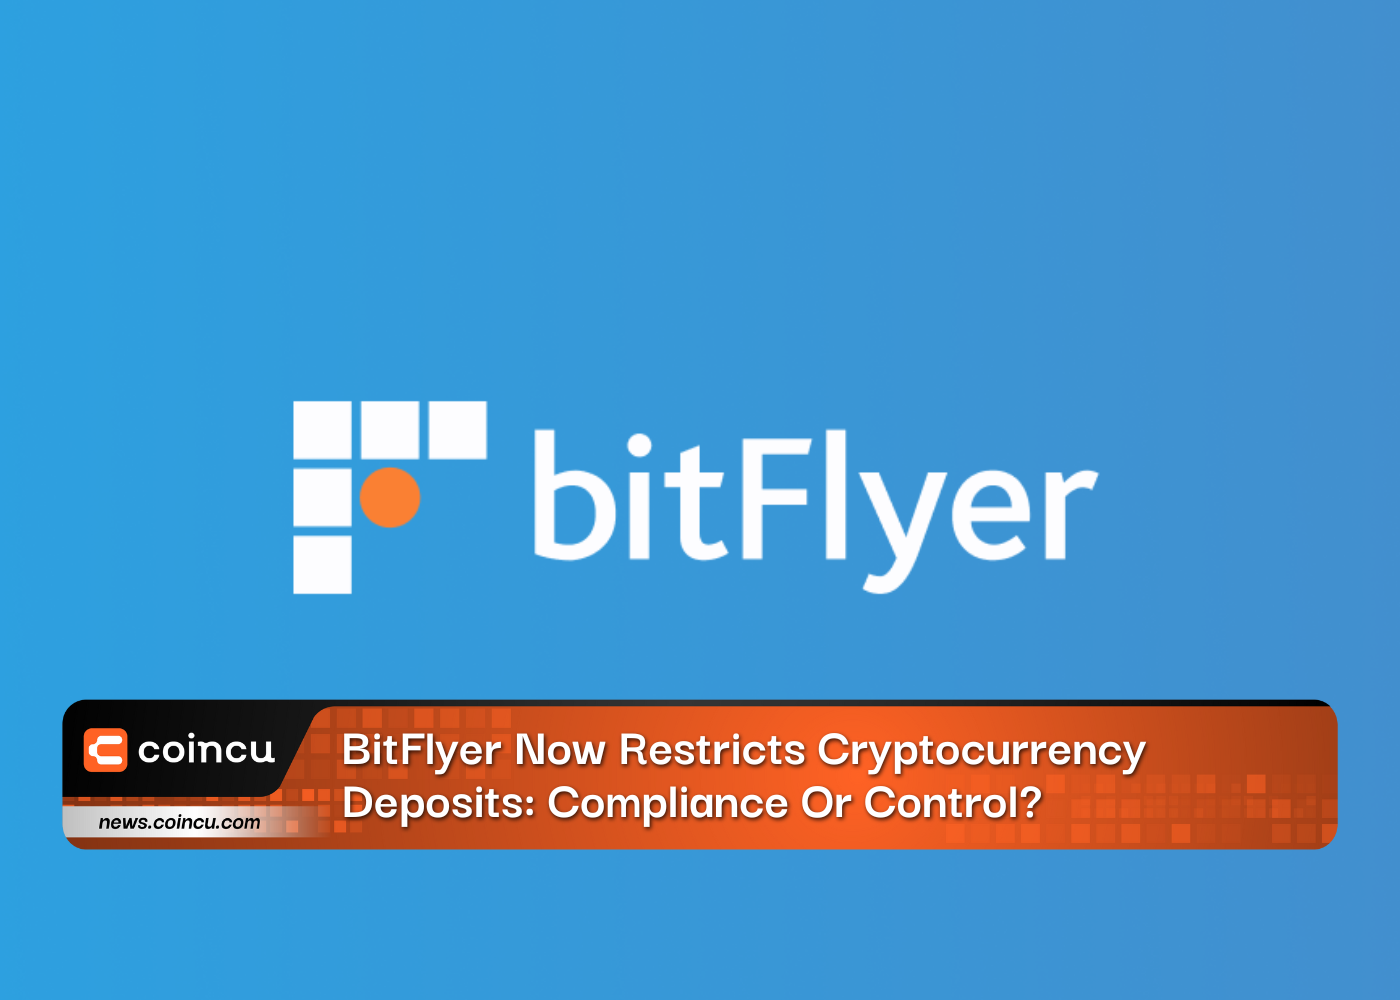 BitFlyer Now Restricts Cryptocurrency Deposits: Compliance Or Control?